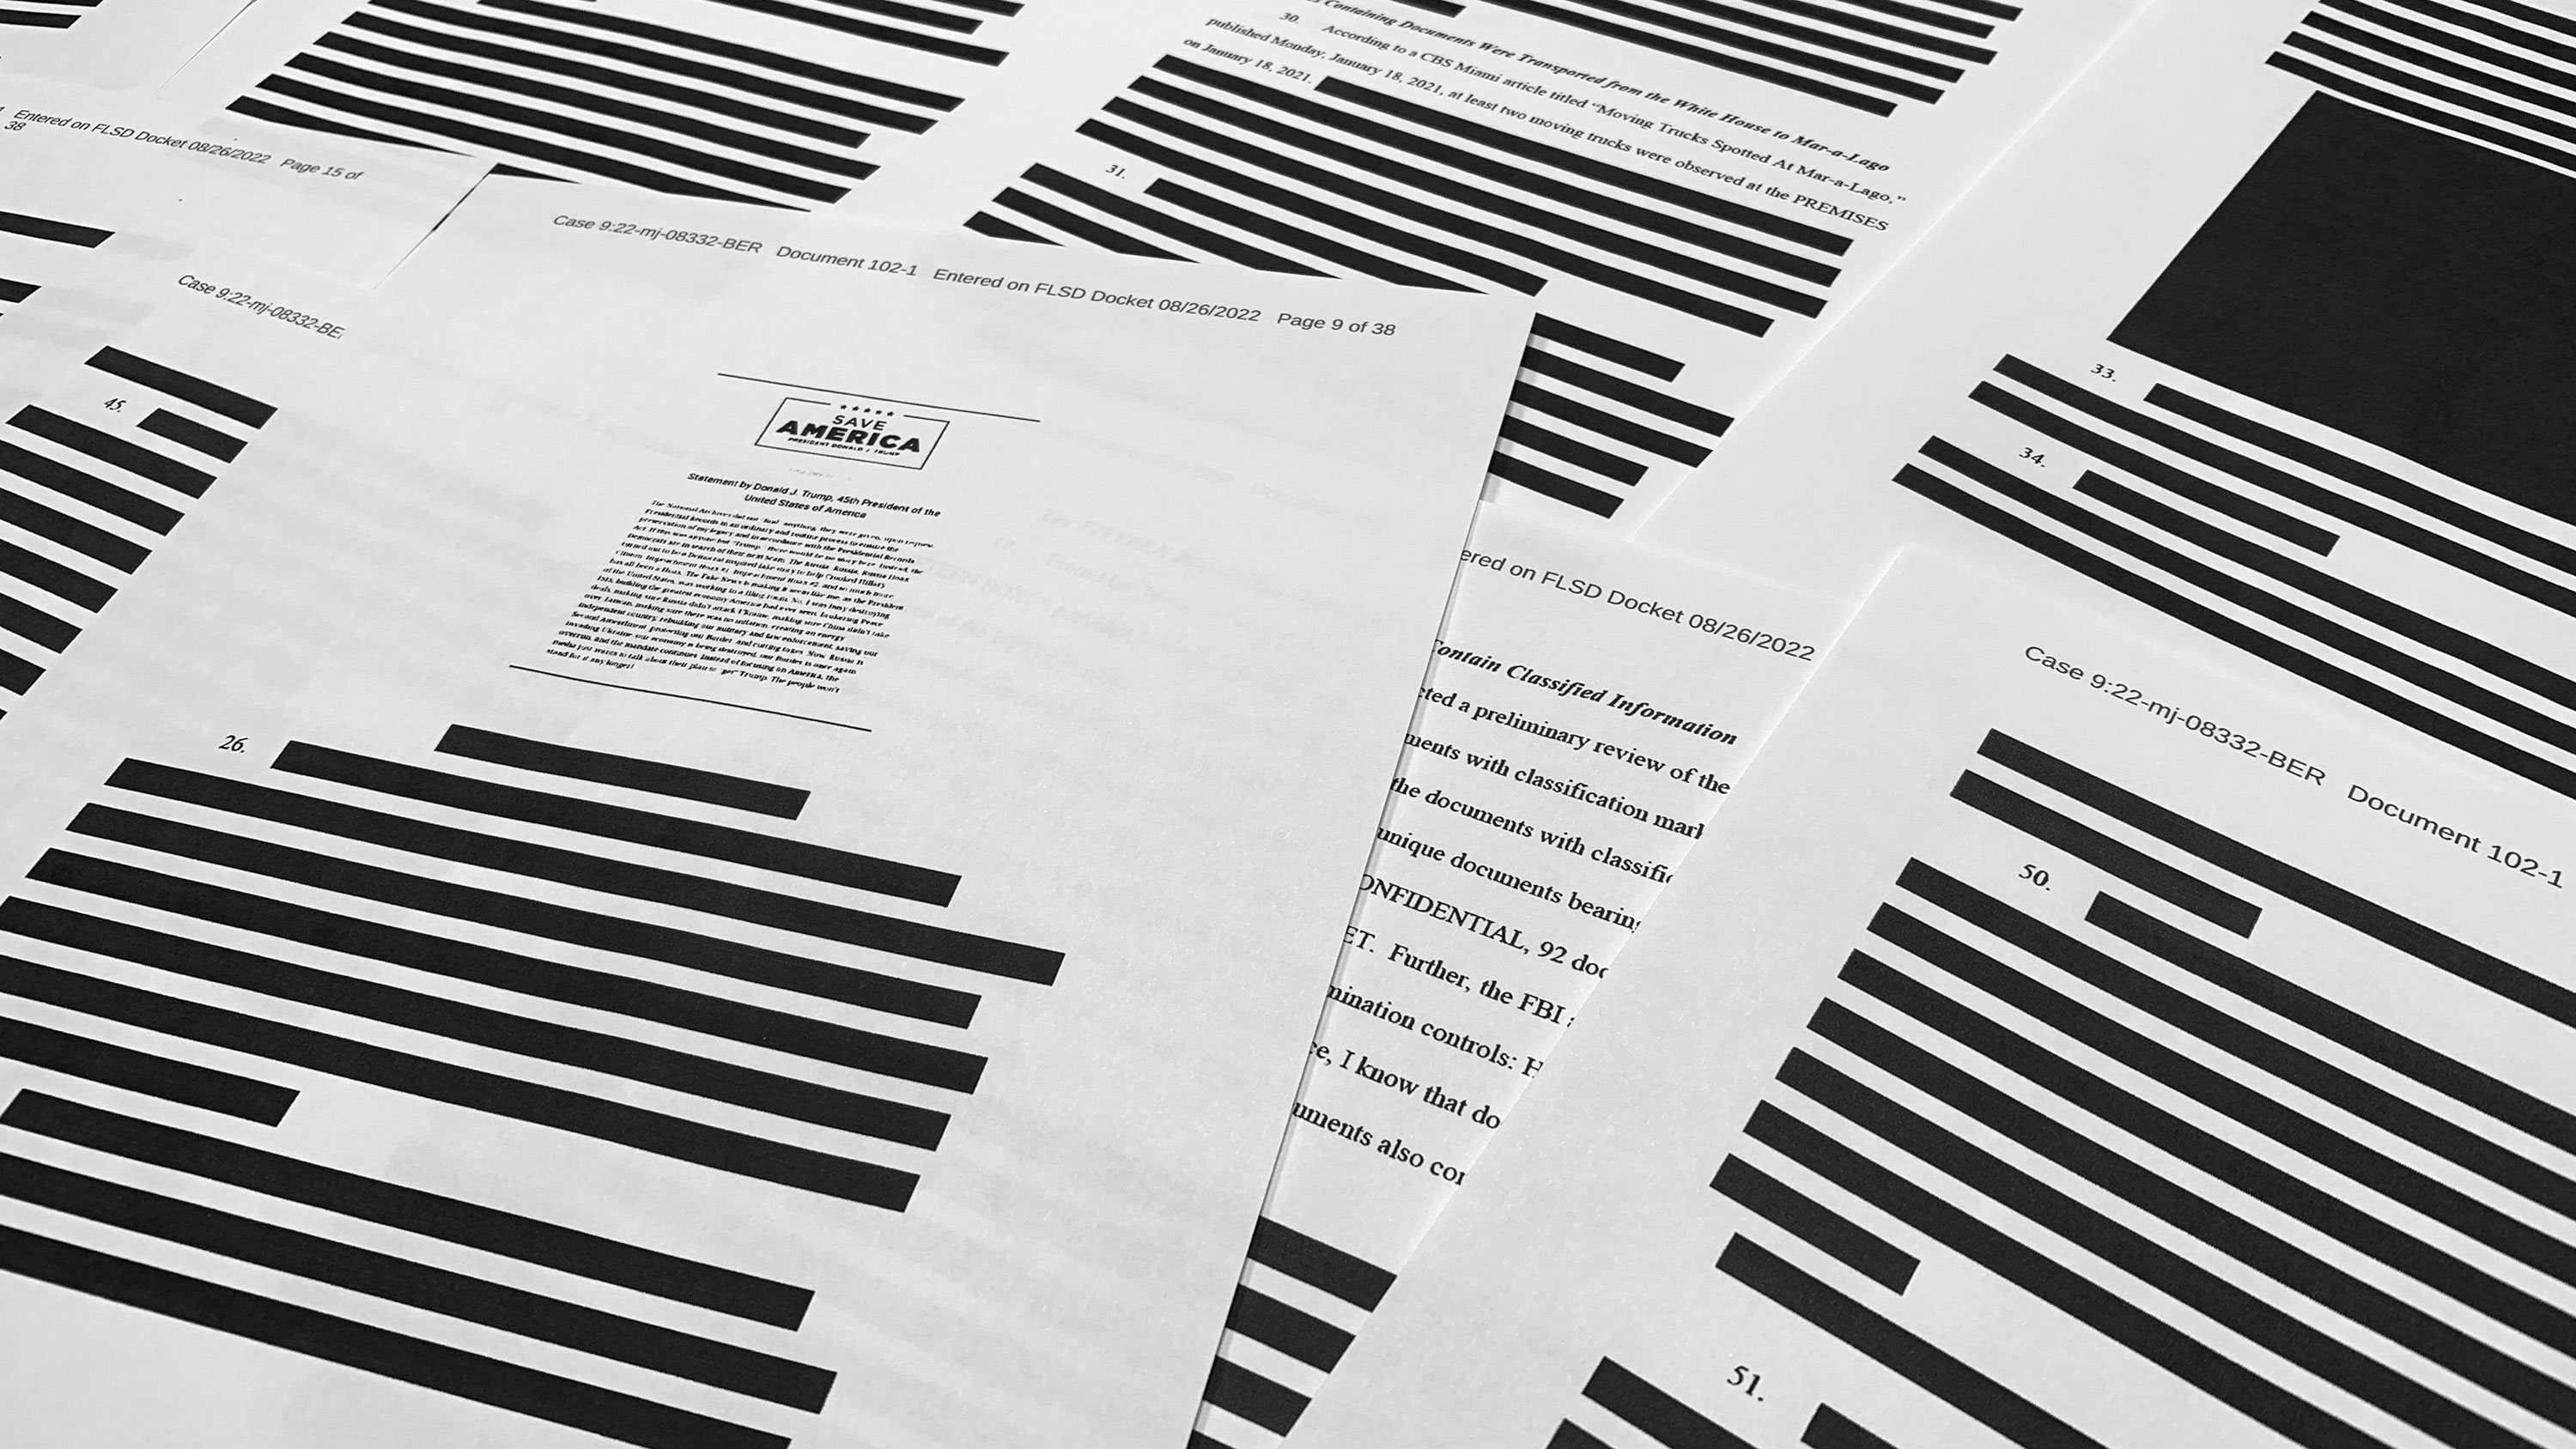 Pages from the affidavit by the FBI in support of obtaining a search warrant for former President Donald Trump's Mar-a-Lago estate are seen on Friday.